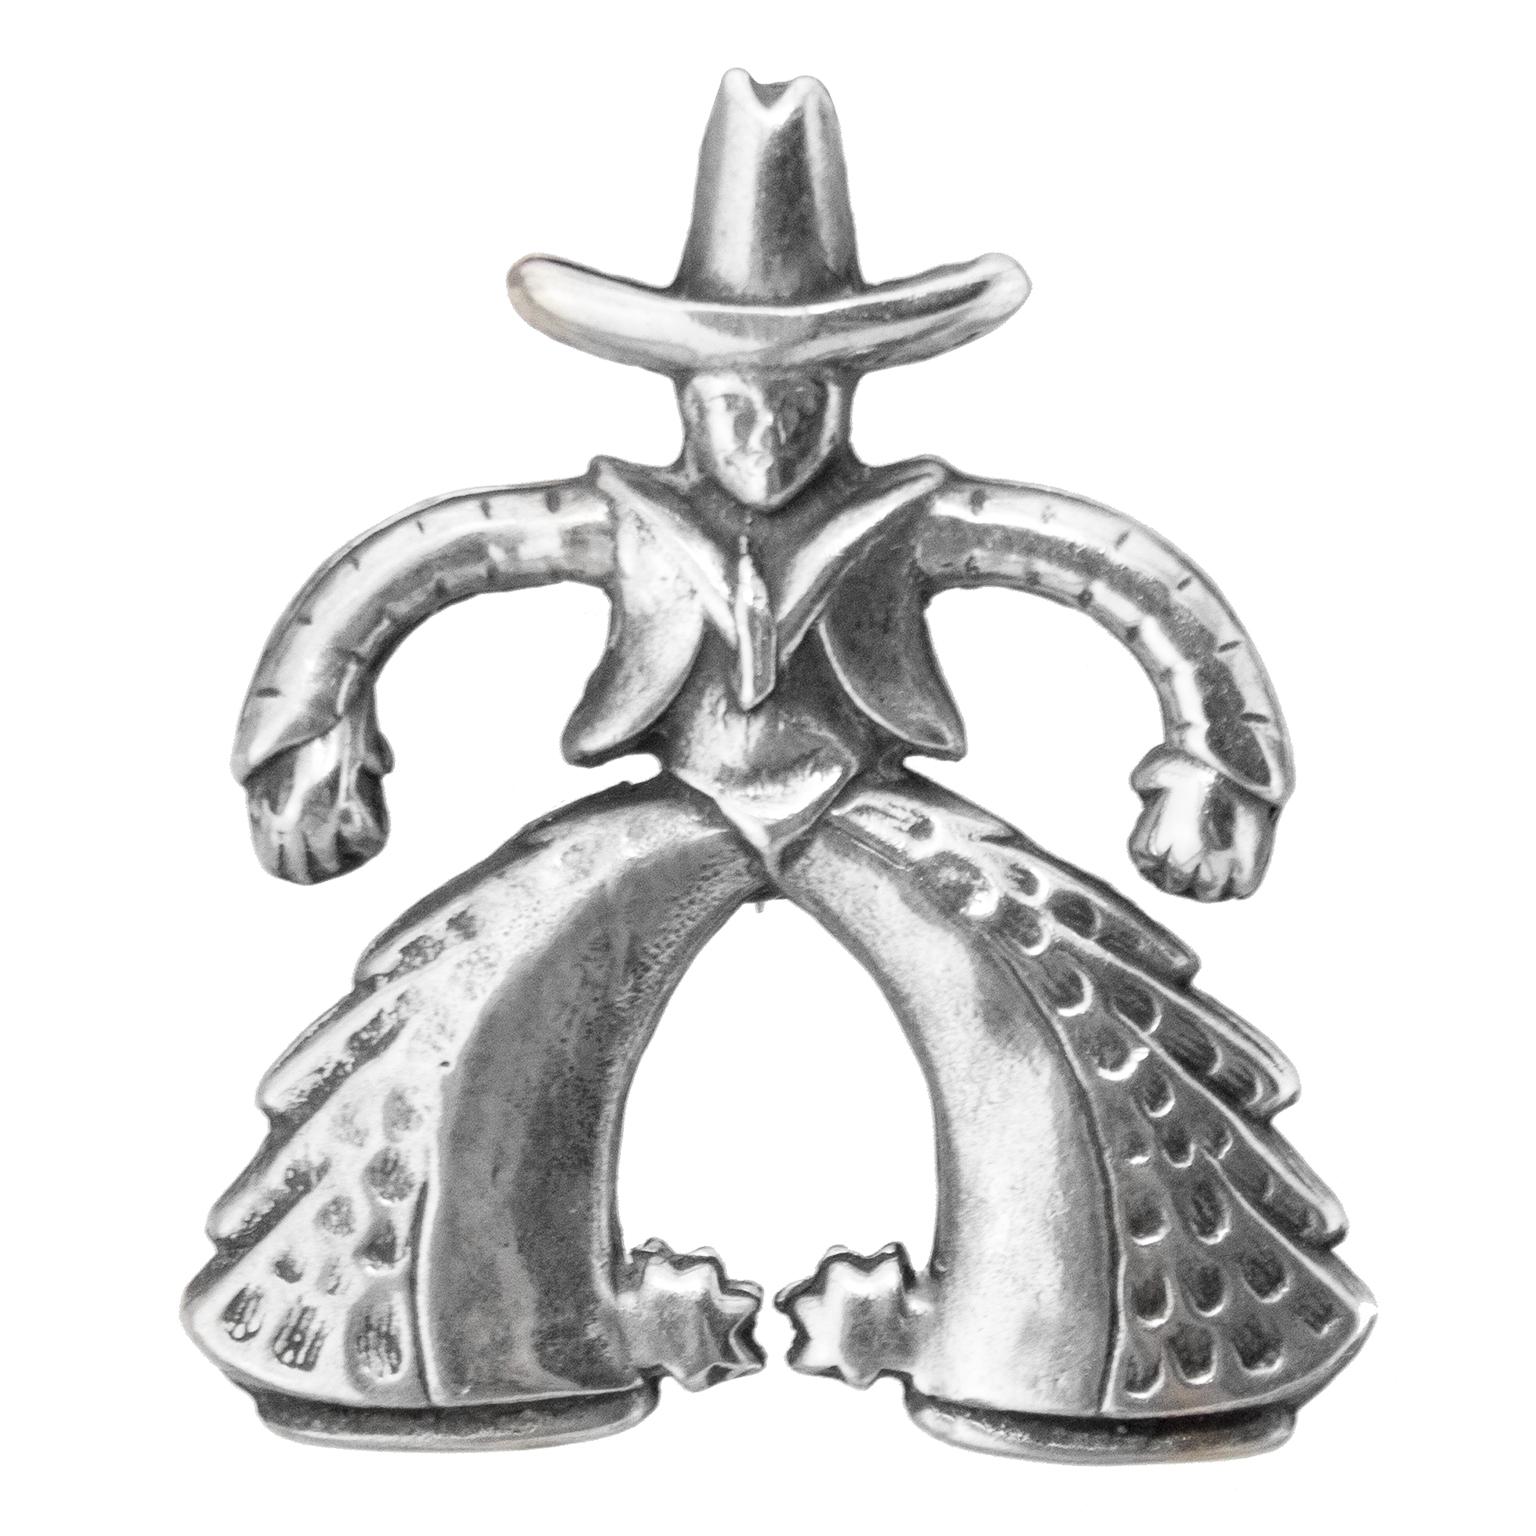 Fun 1950's sterling silver pin in the shape of a cowboy featuring an oversized hat, rounded arms, large rounded legs with fringe chaps and spurs on the back of his boots. Pin back sits vertically straight. Serling hallmark on back. Excellent vintage